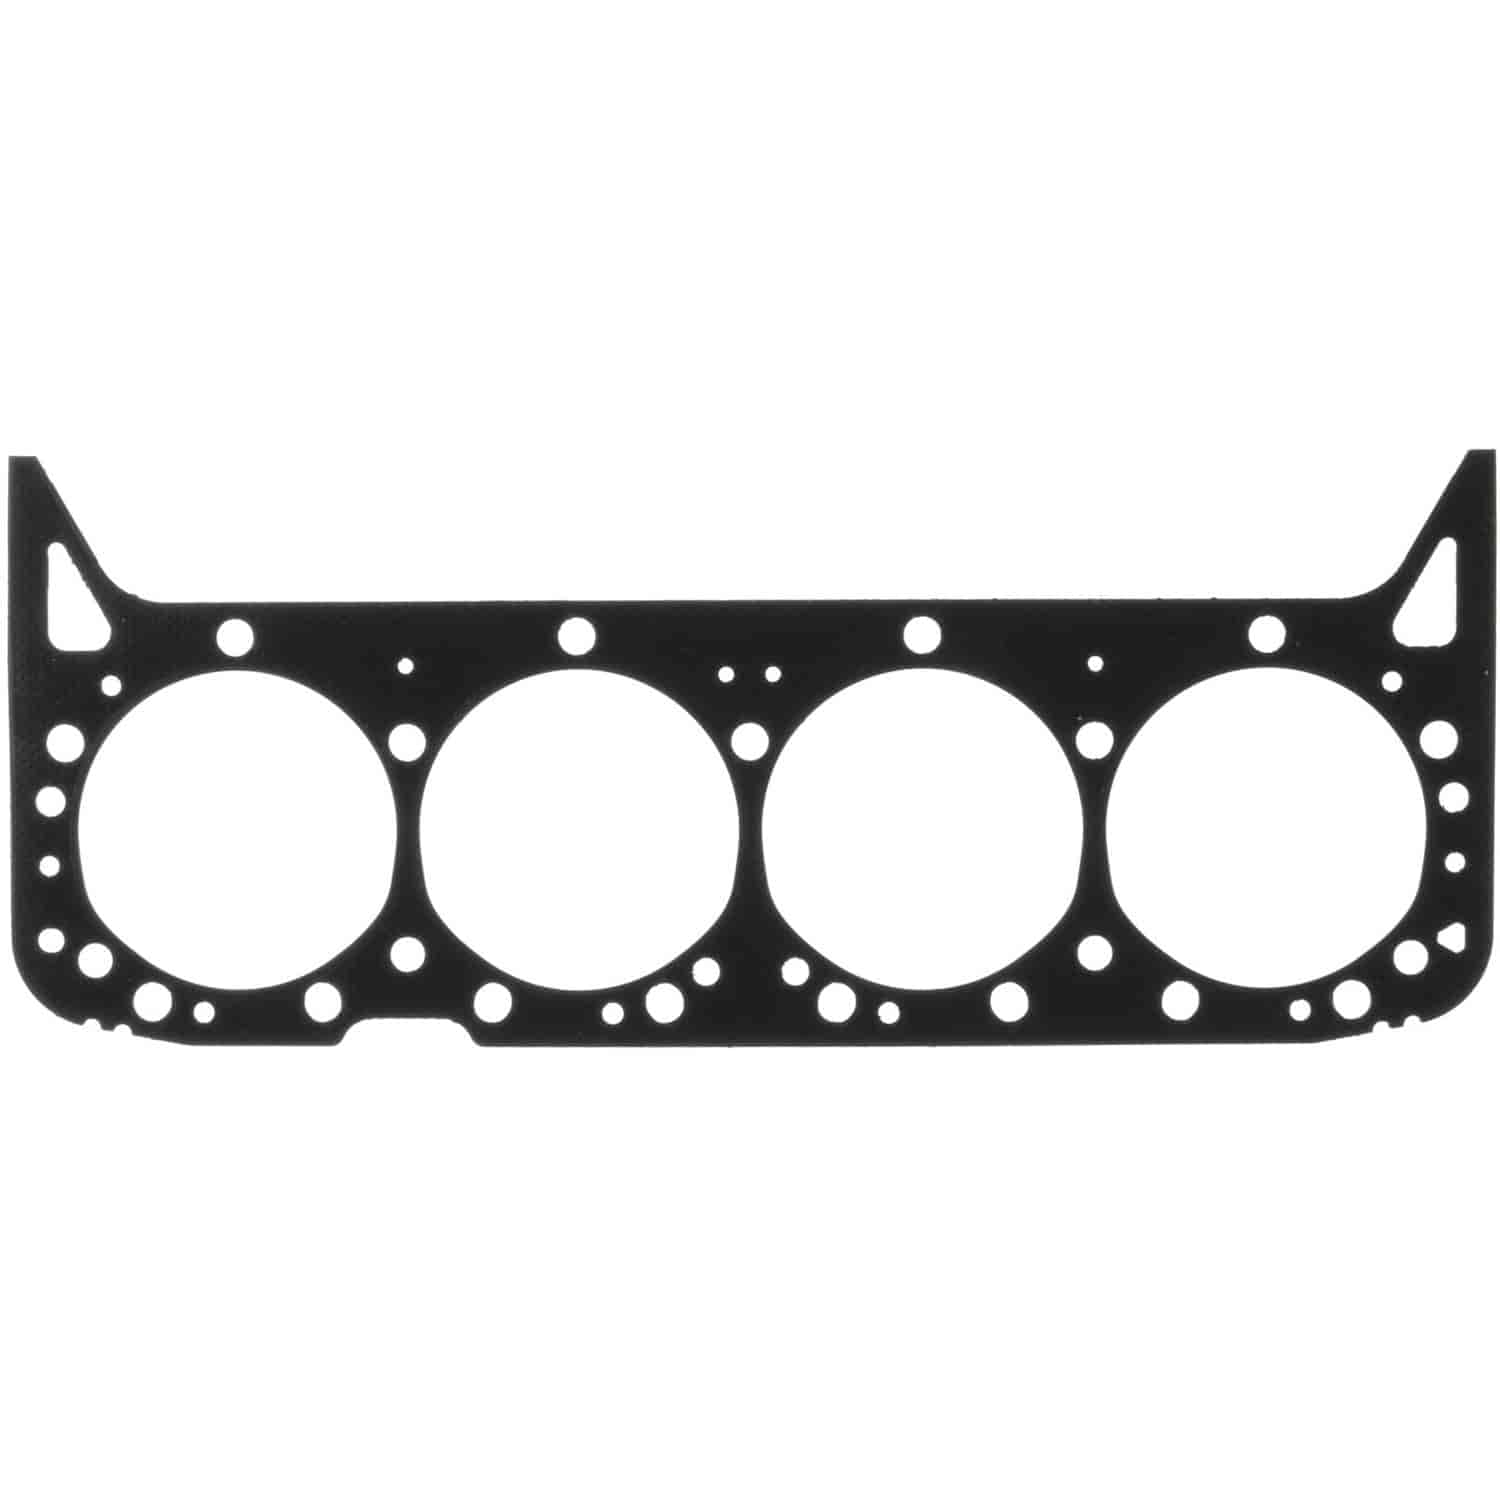 Cylinder Head Gasket 1968-2002 Small Block Chevy 350 (5.7L)